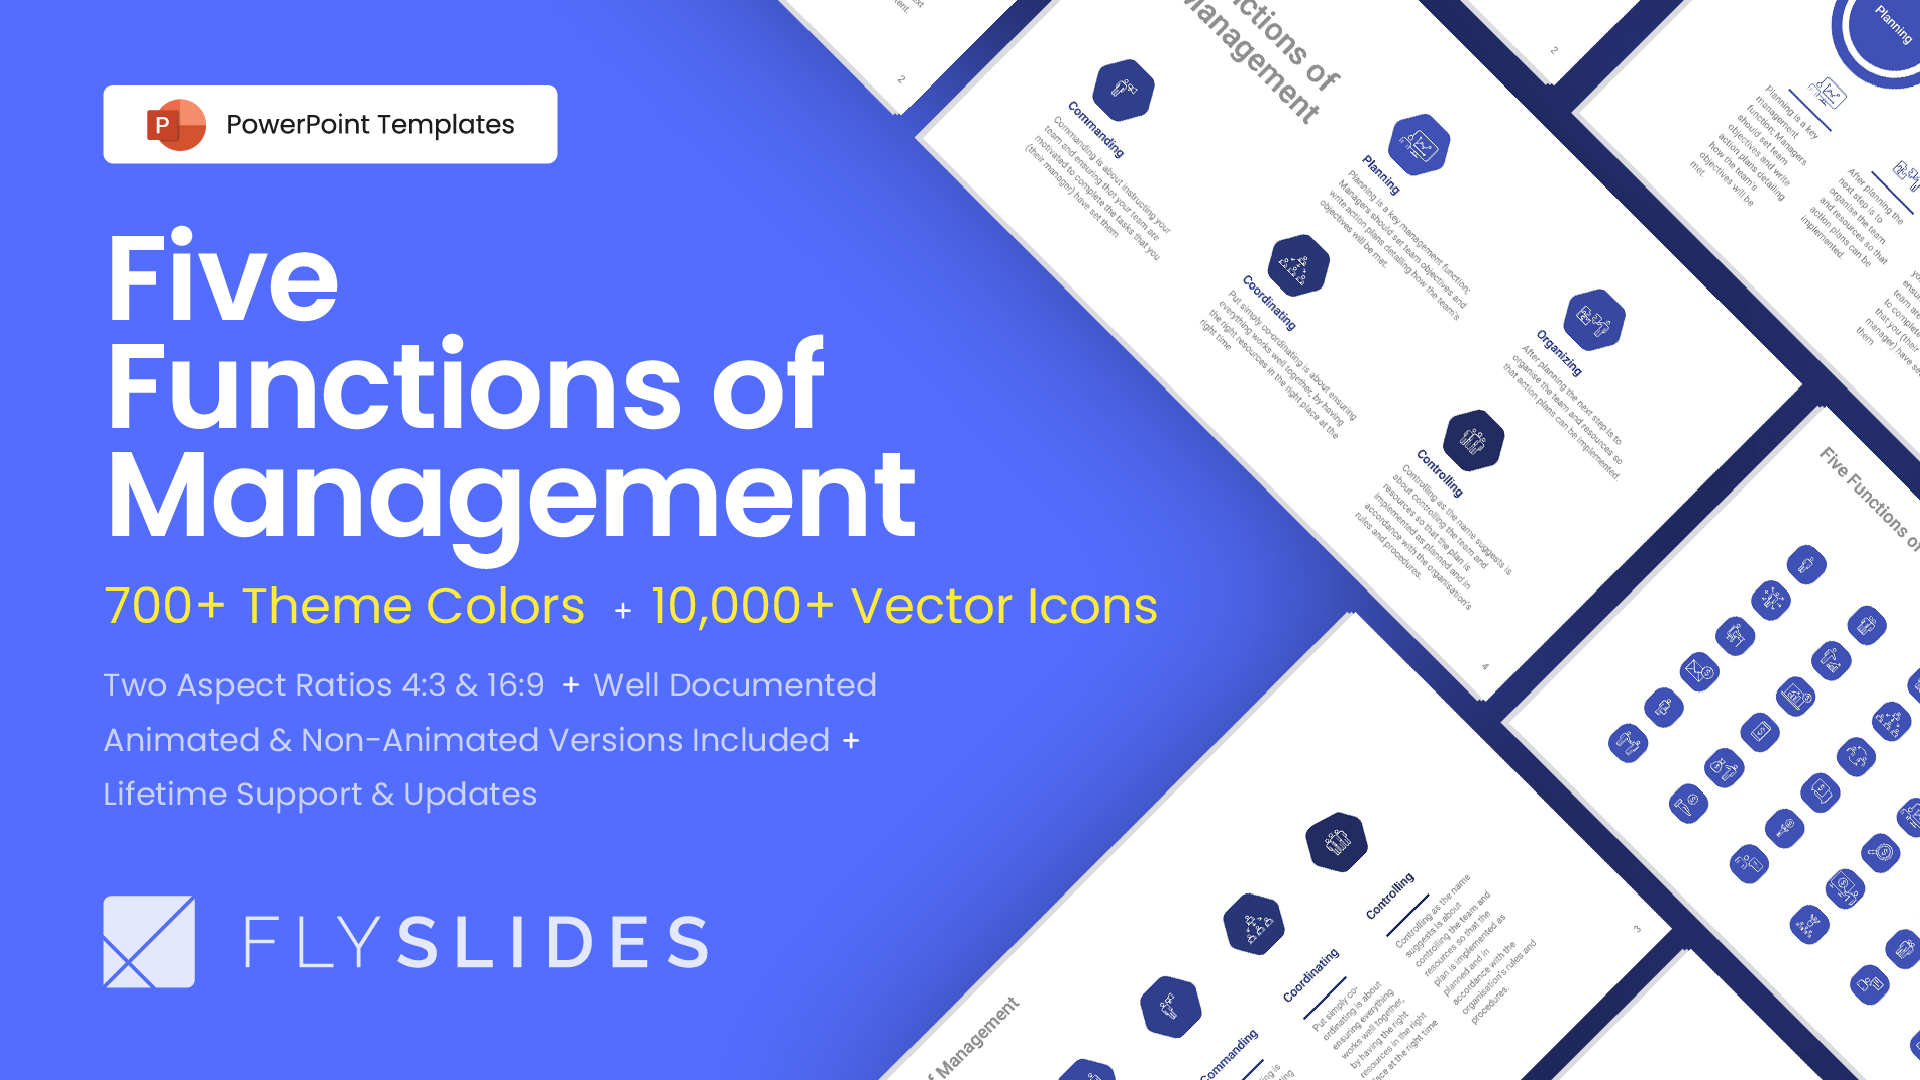 Top Five Functions of Management PowerPoint Templates PPT Presentation Slides Designs